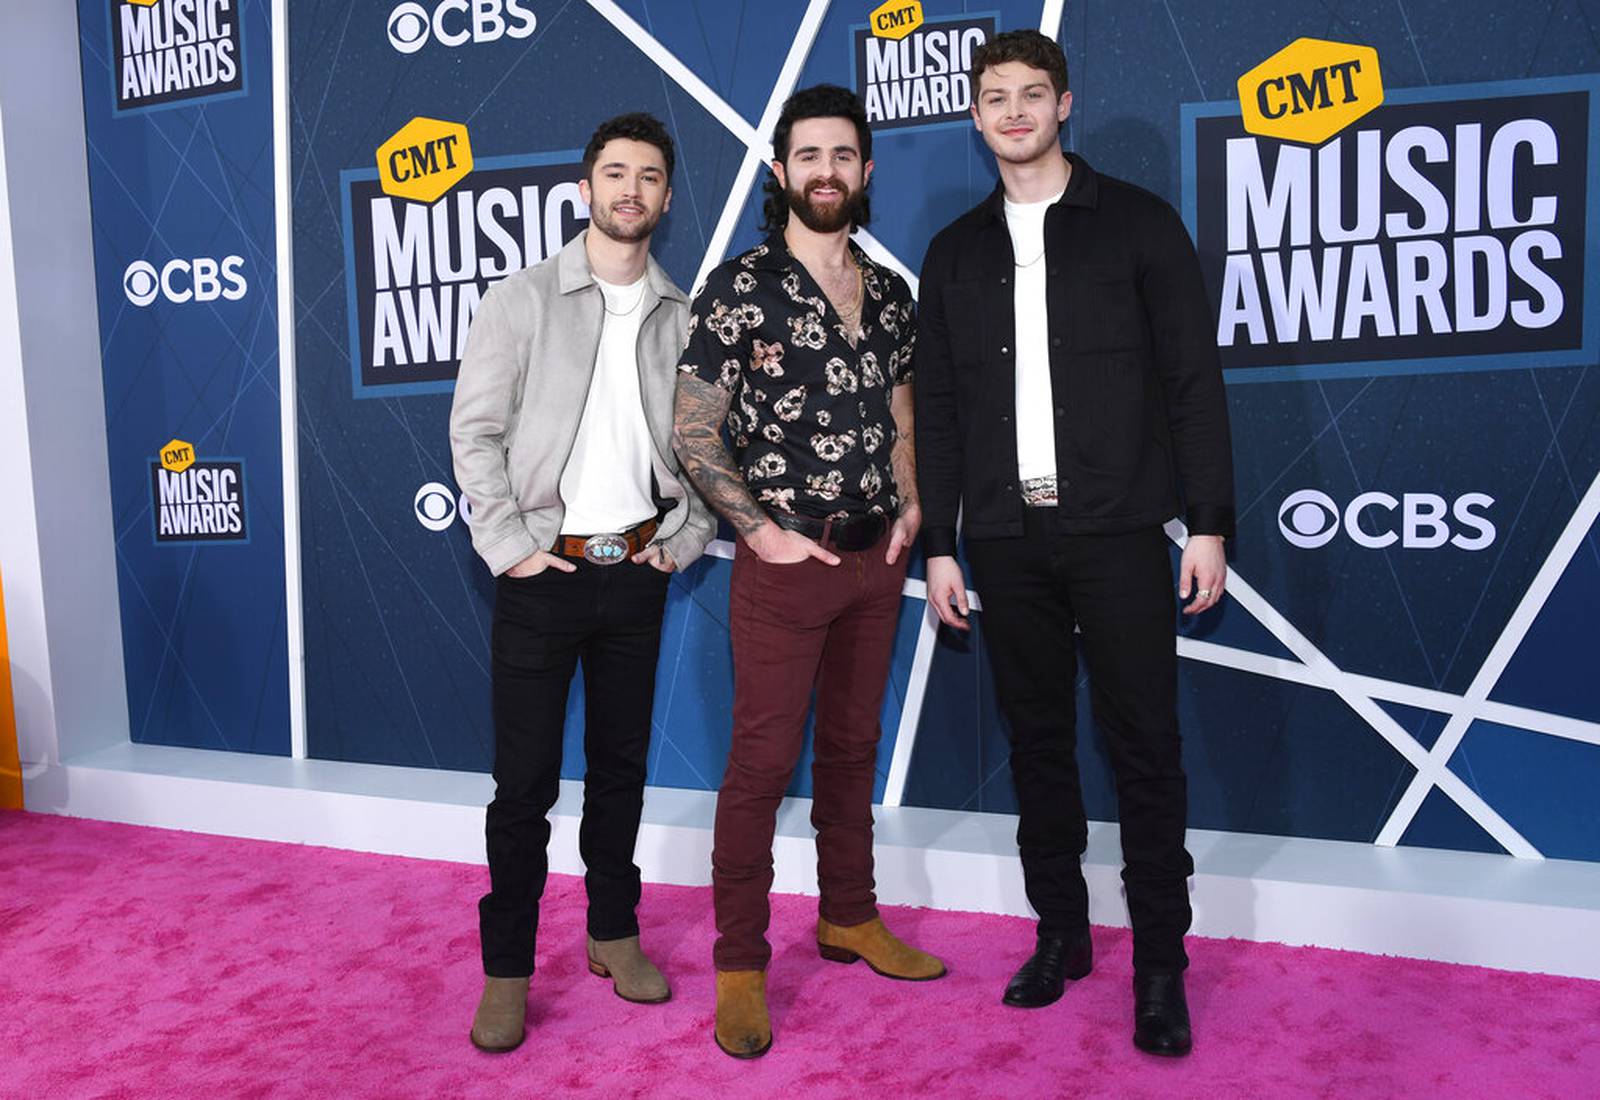 2022 CMT Music Awards See the complete winners list 102.3 KRMG